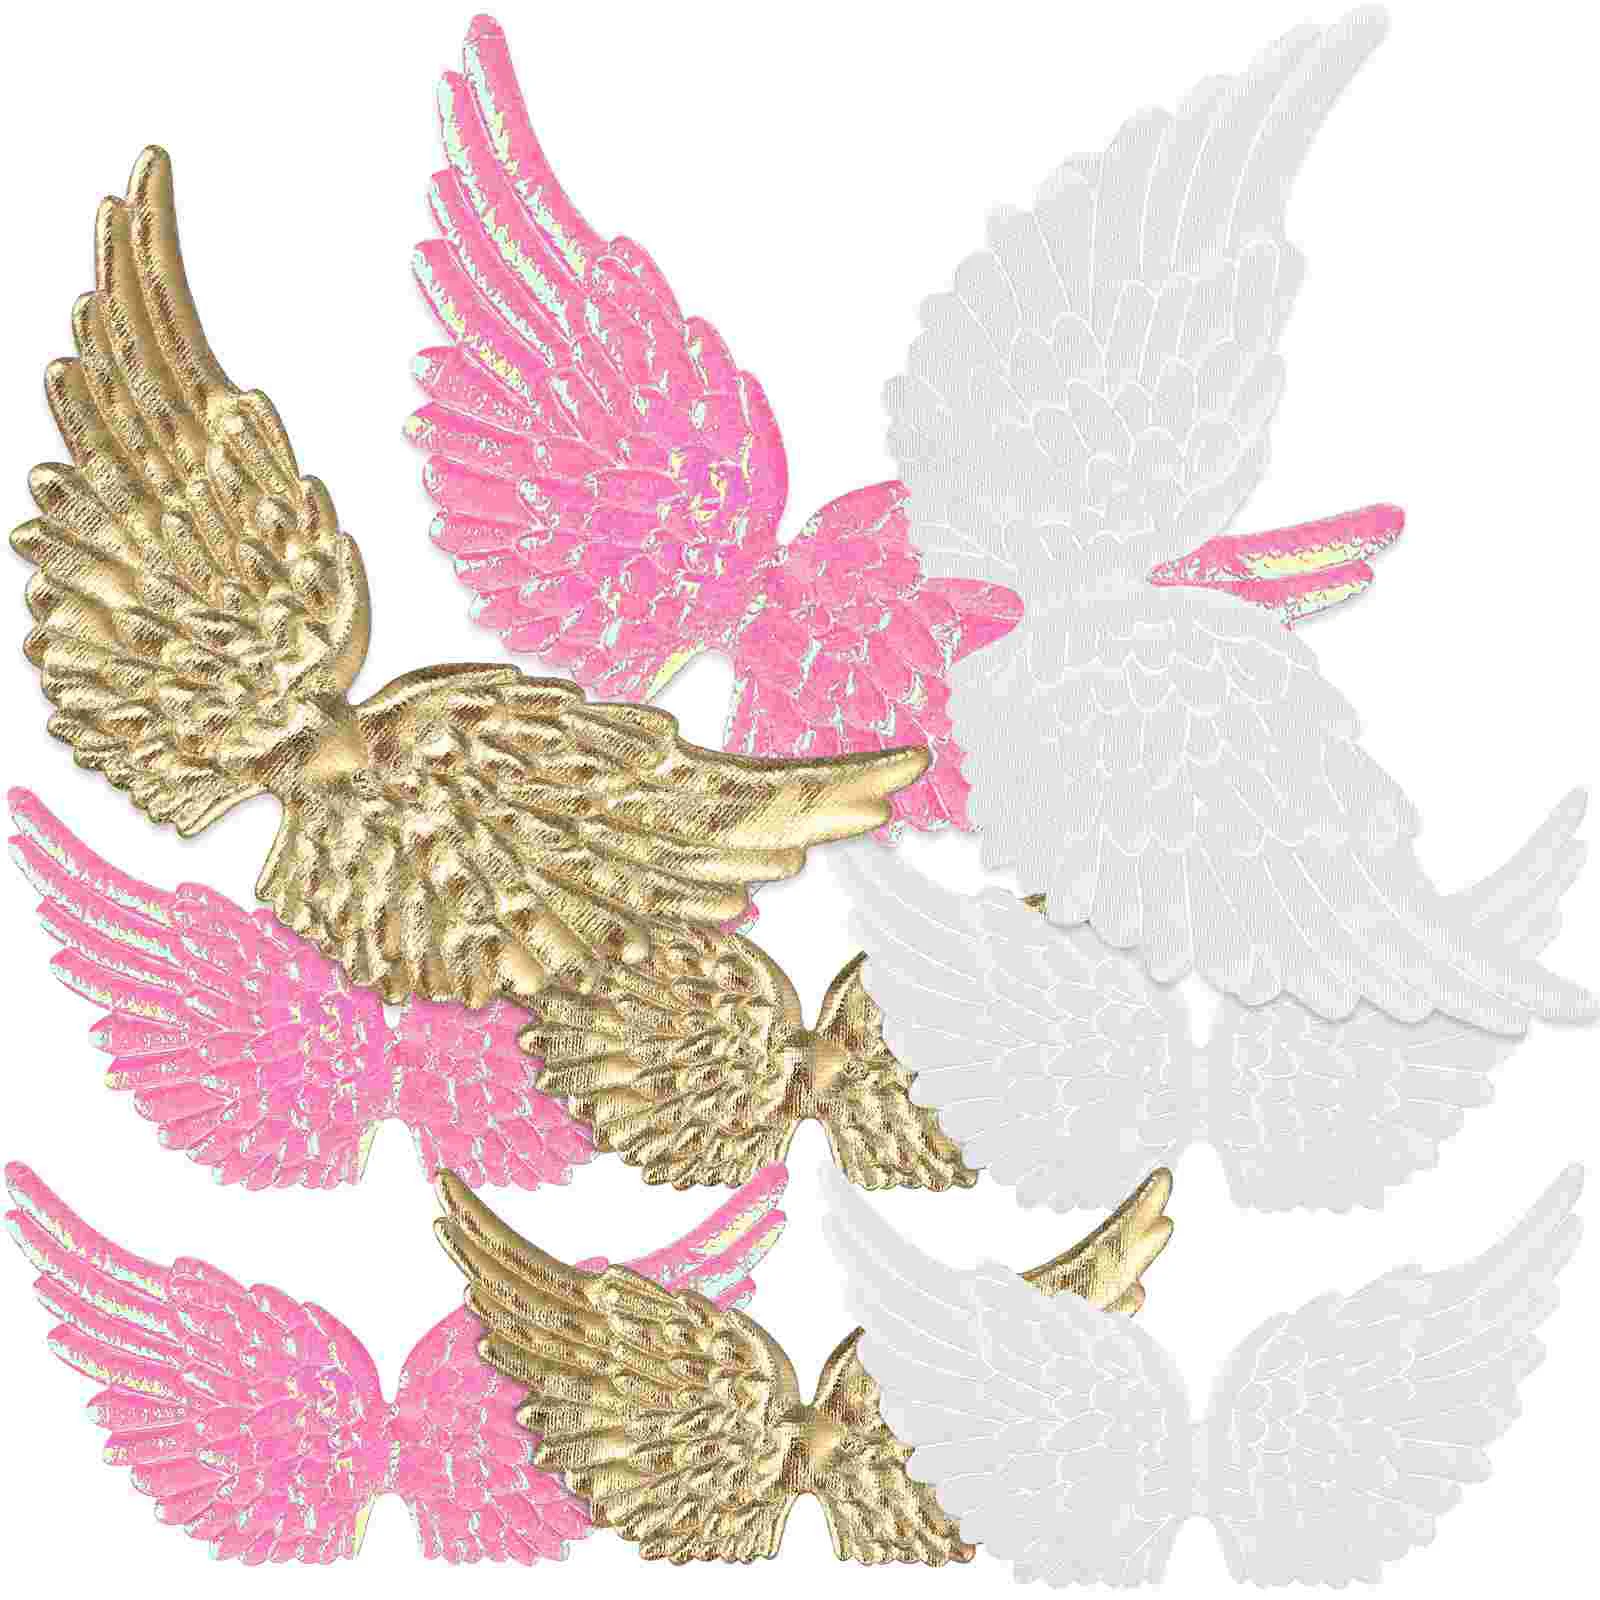 

36 Pcs Accessories Angel Wings Girl Crafts Teen Girls Sew Patches Cloth Ornaments Golden